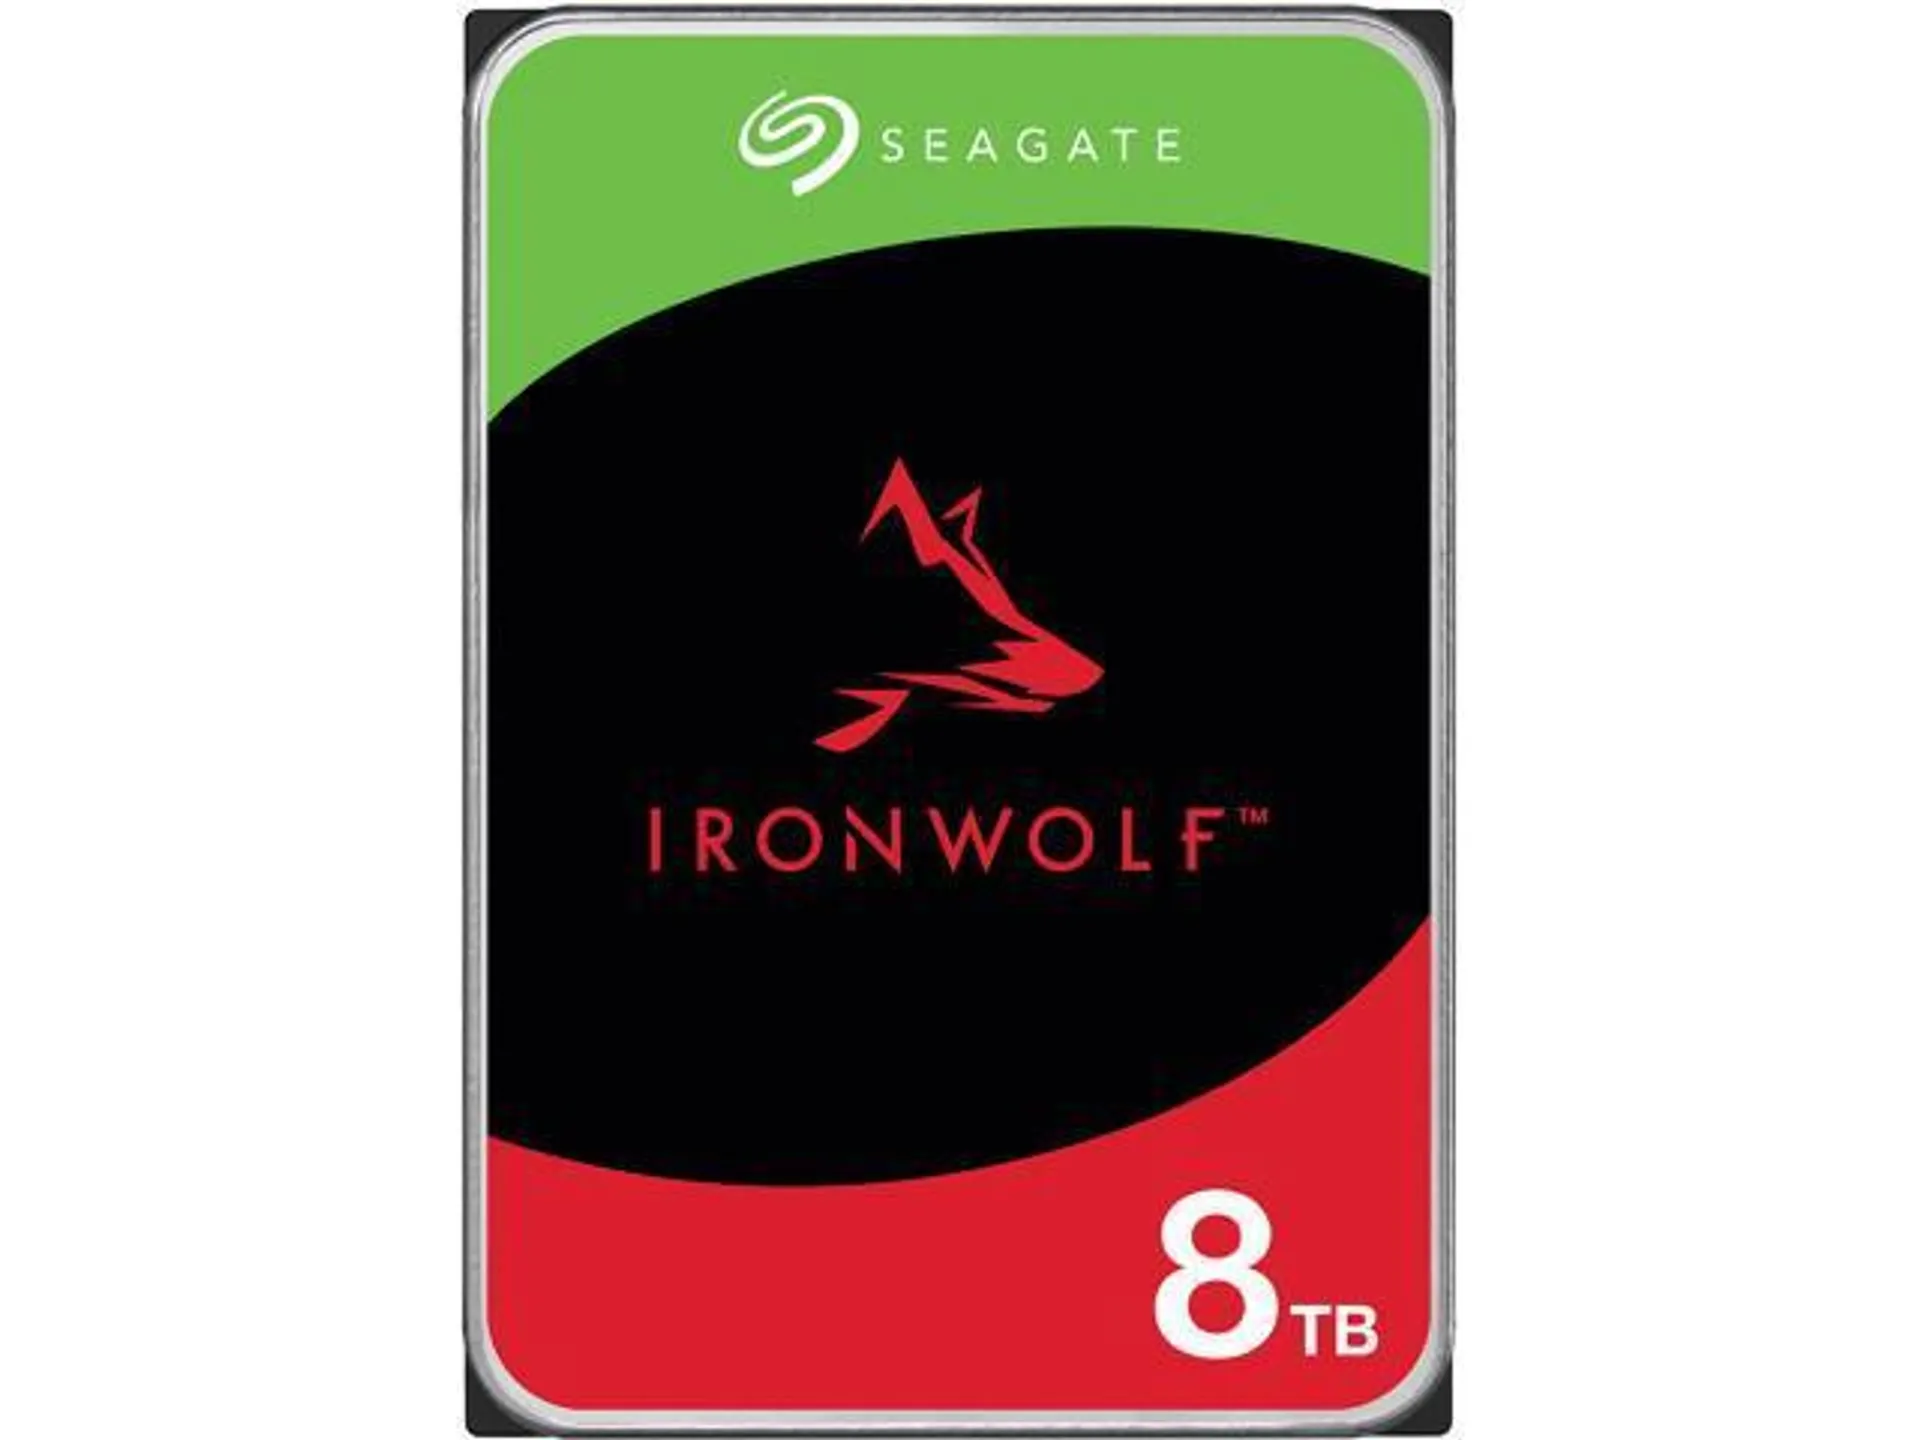 Seagate IronWolf 8TB NAS Hard Drive 7200 RPM 256MB Cache SATA 6.0Gb/s CMR 3.5" Internal HDD for RAID Network Attached Storage ST8000VN004 - OEM